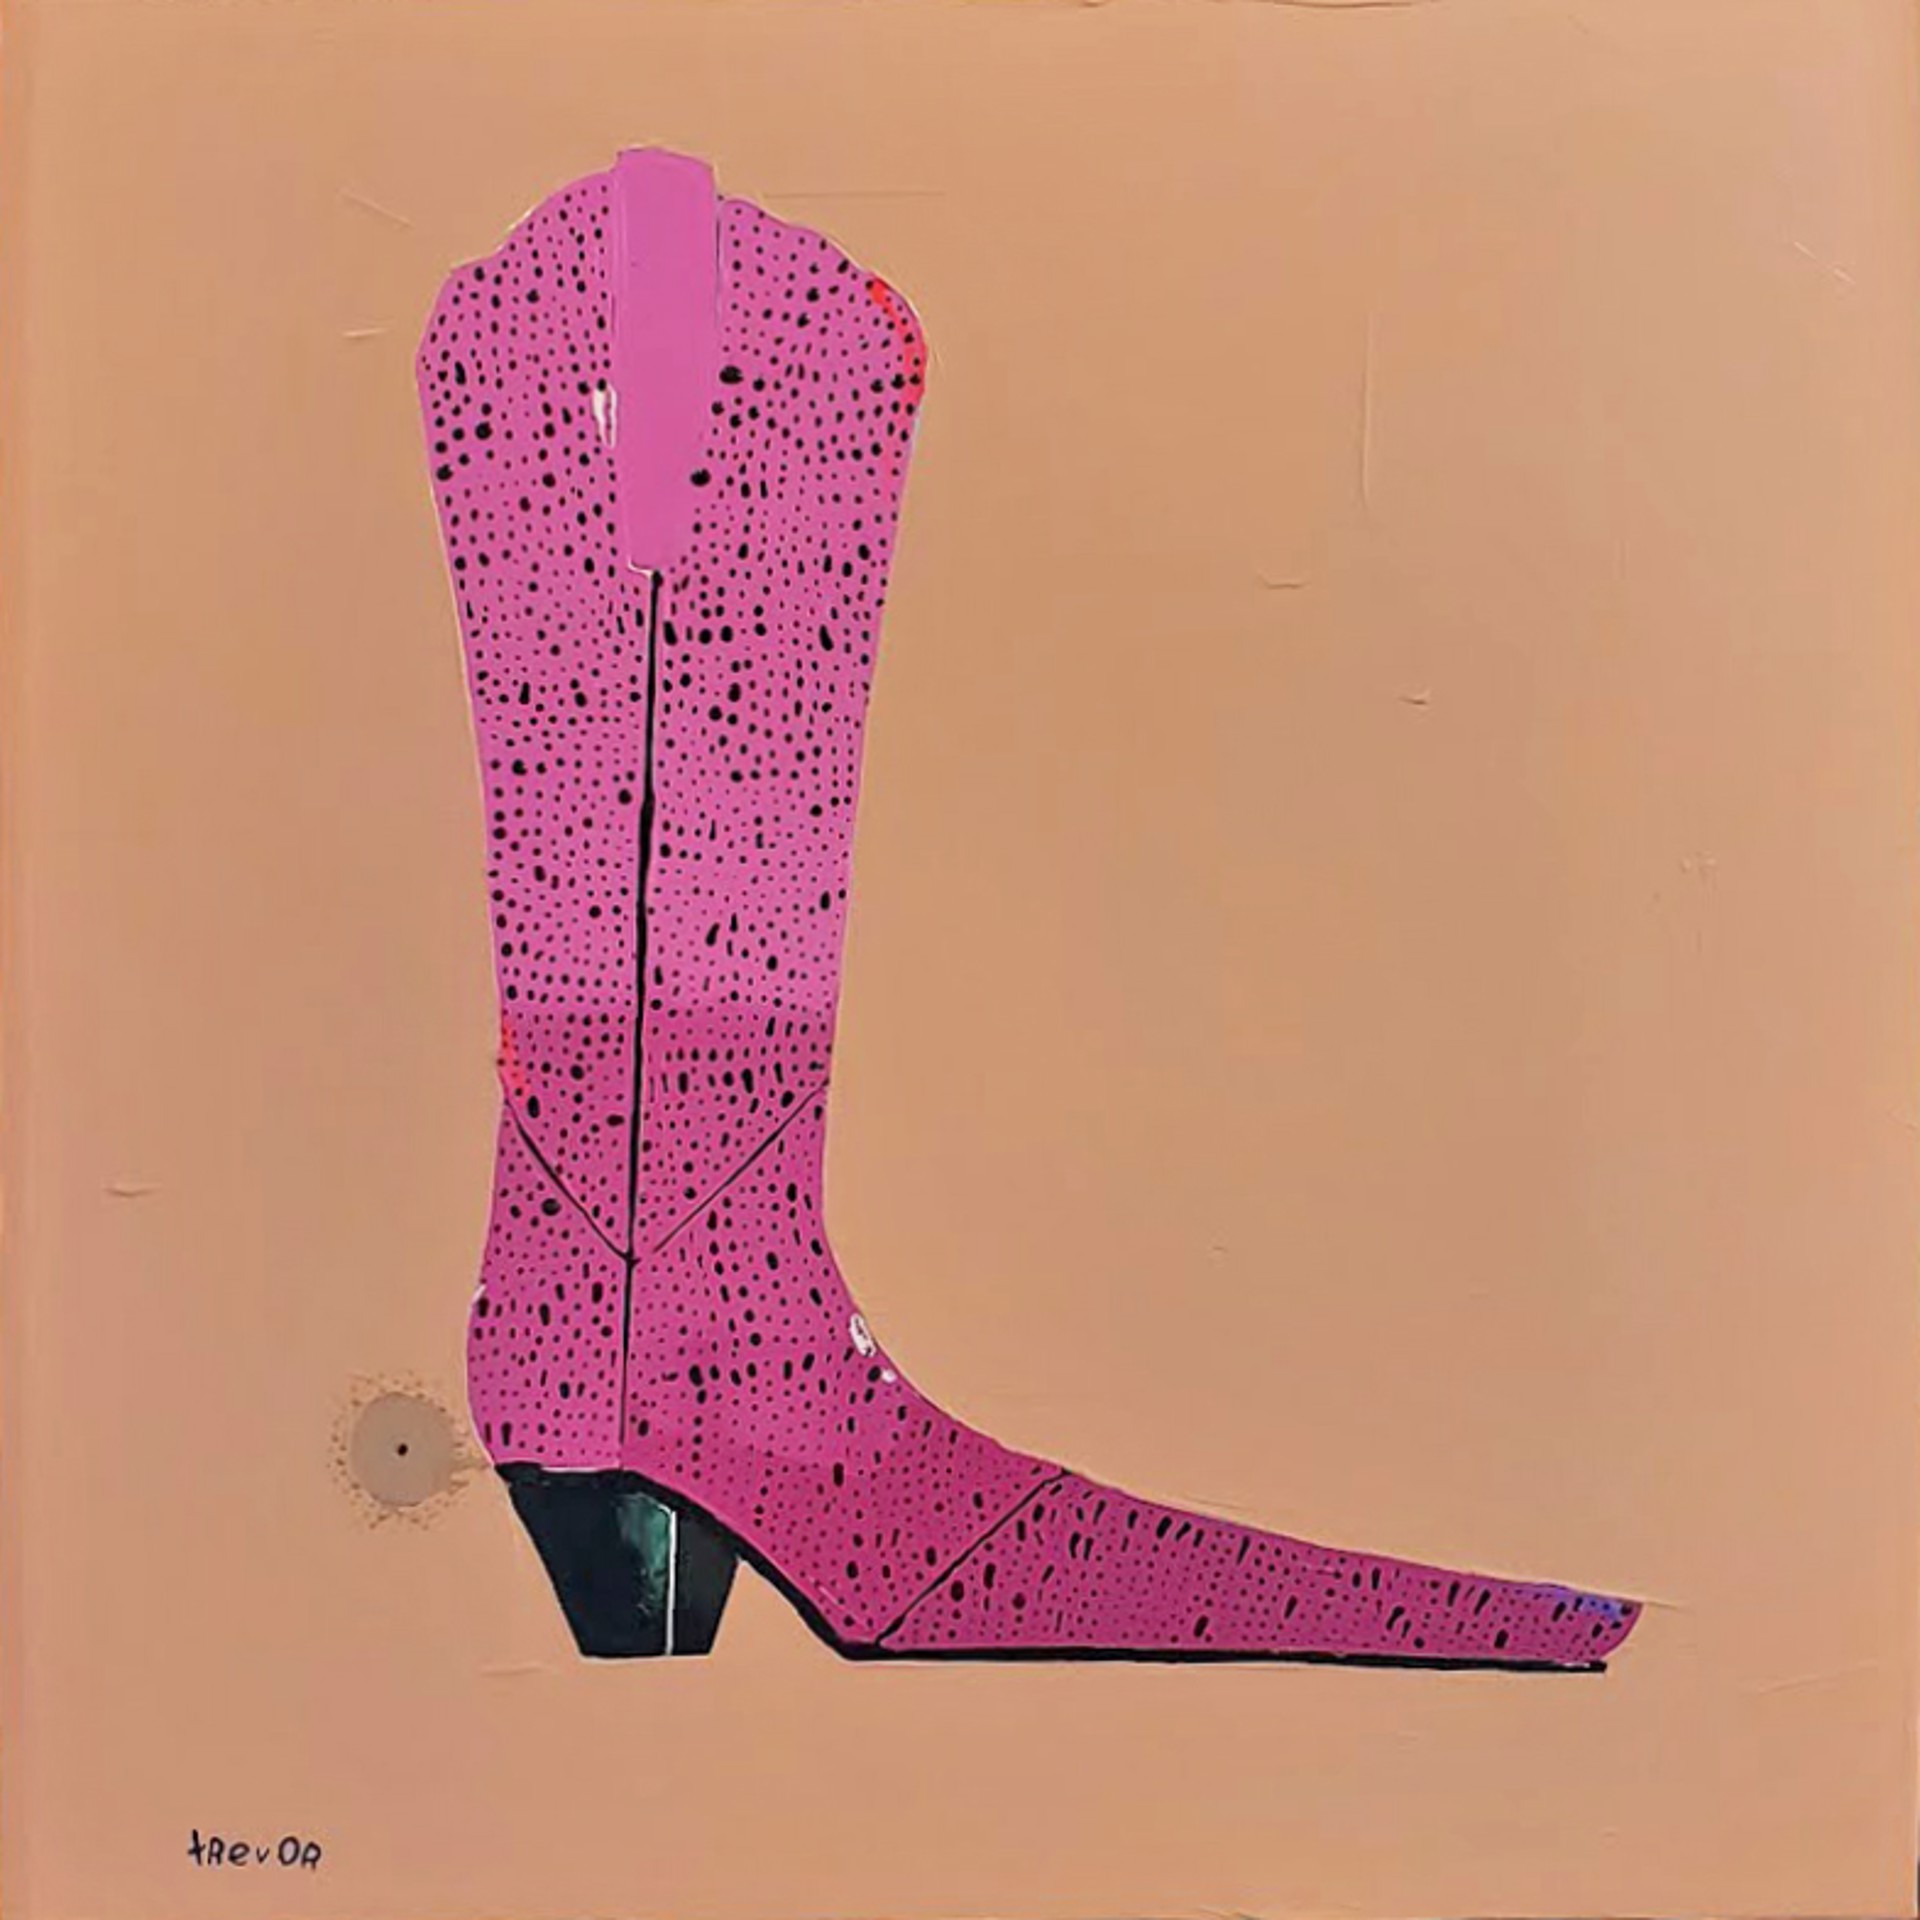 She's Pink To Boot by Trevor Mikula